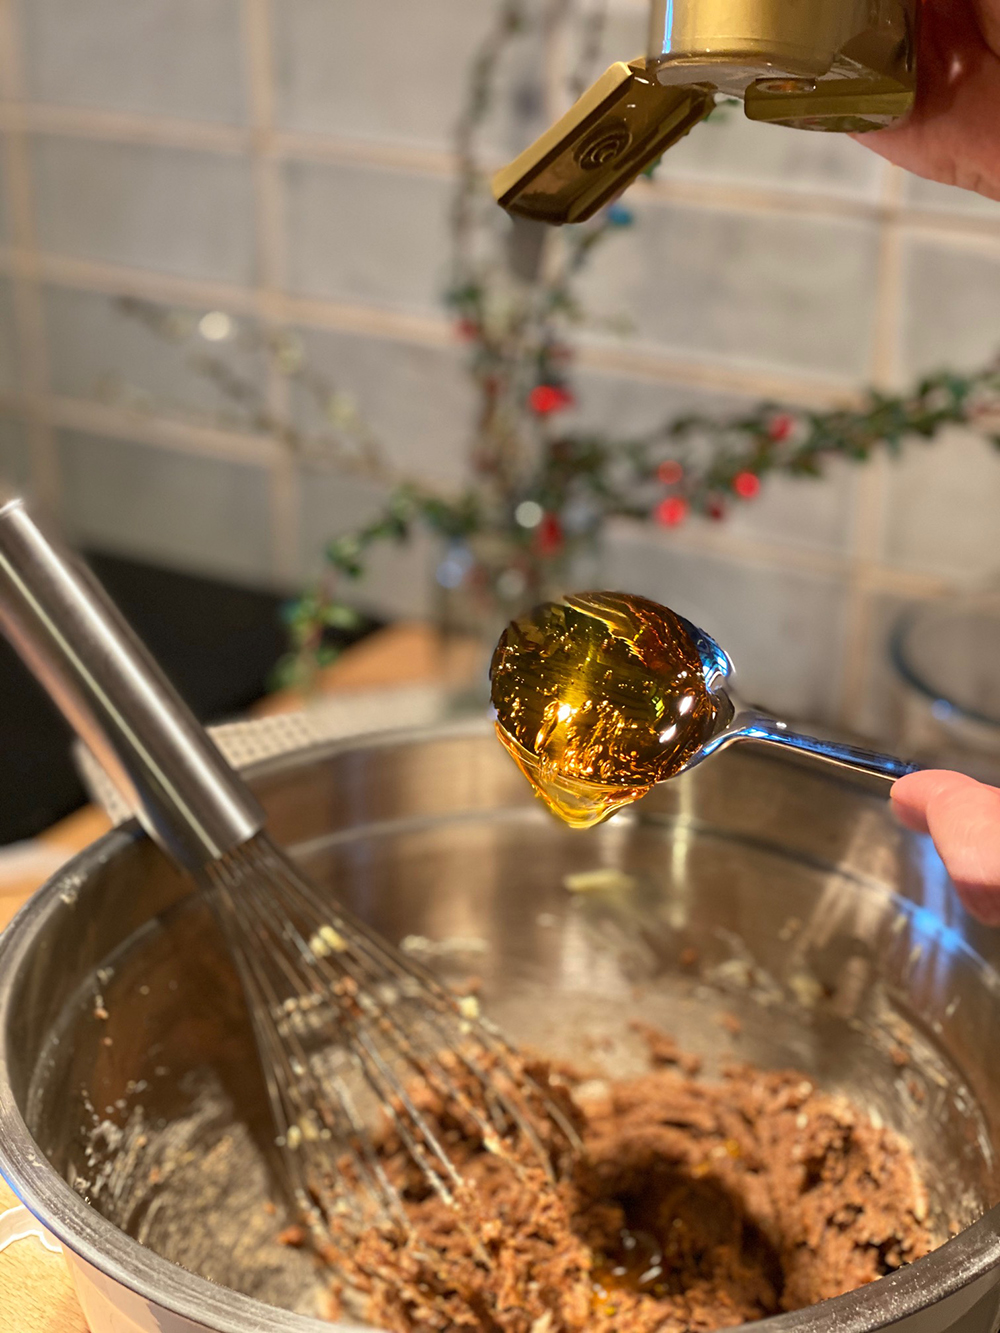 A spoon of golden syrup is dropped into a brown gooey mixture.